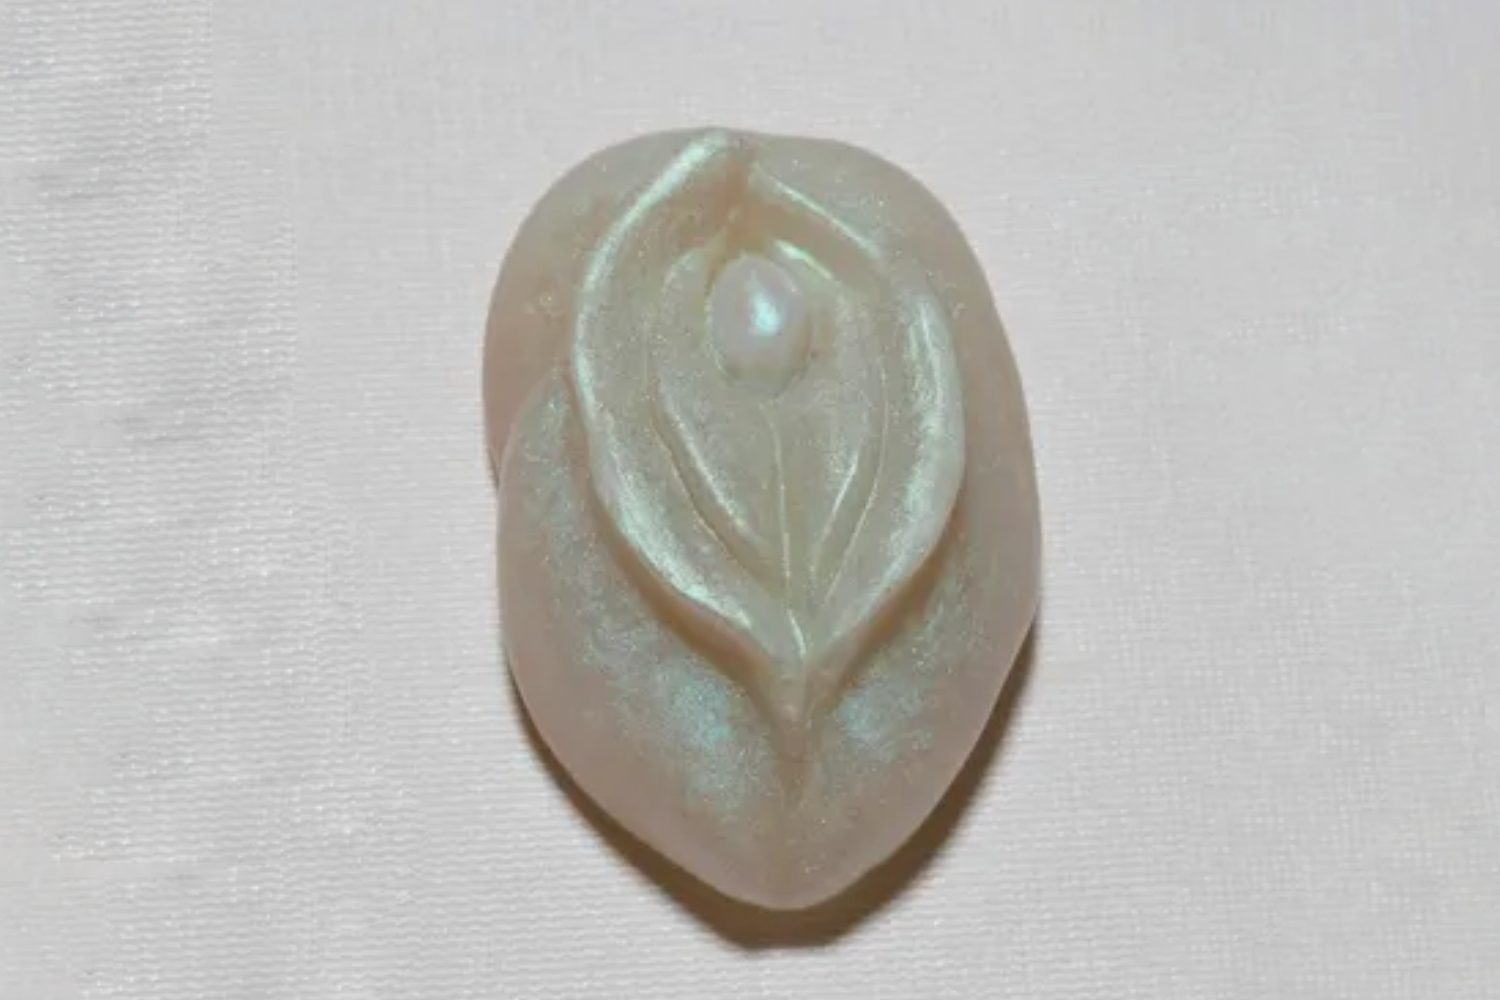 A white stone with a leaf design on it.